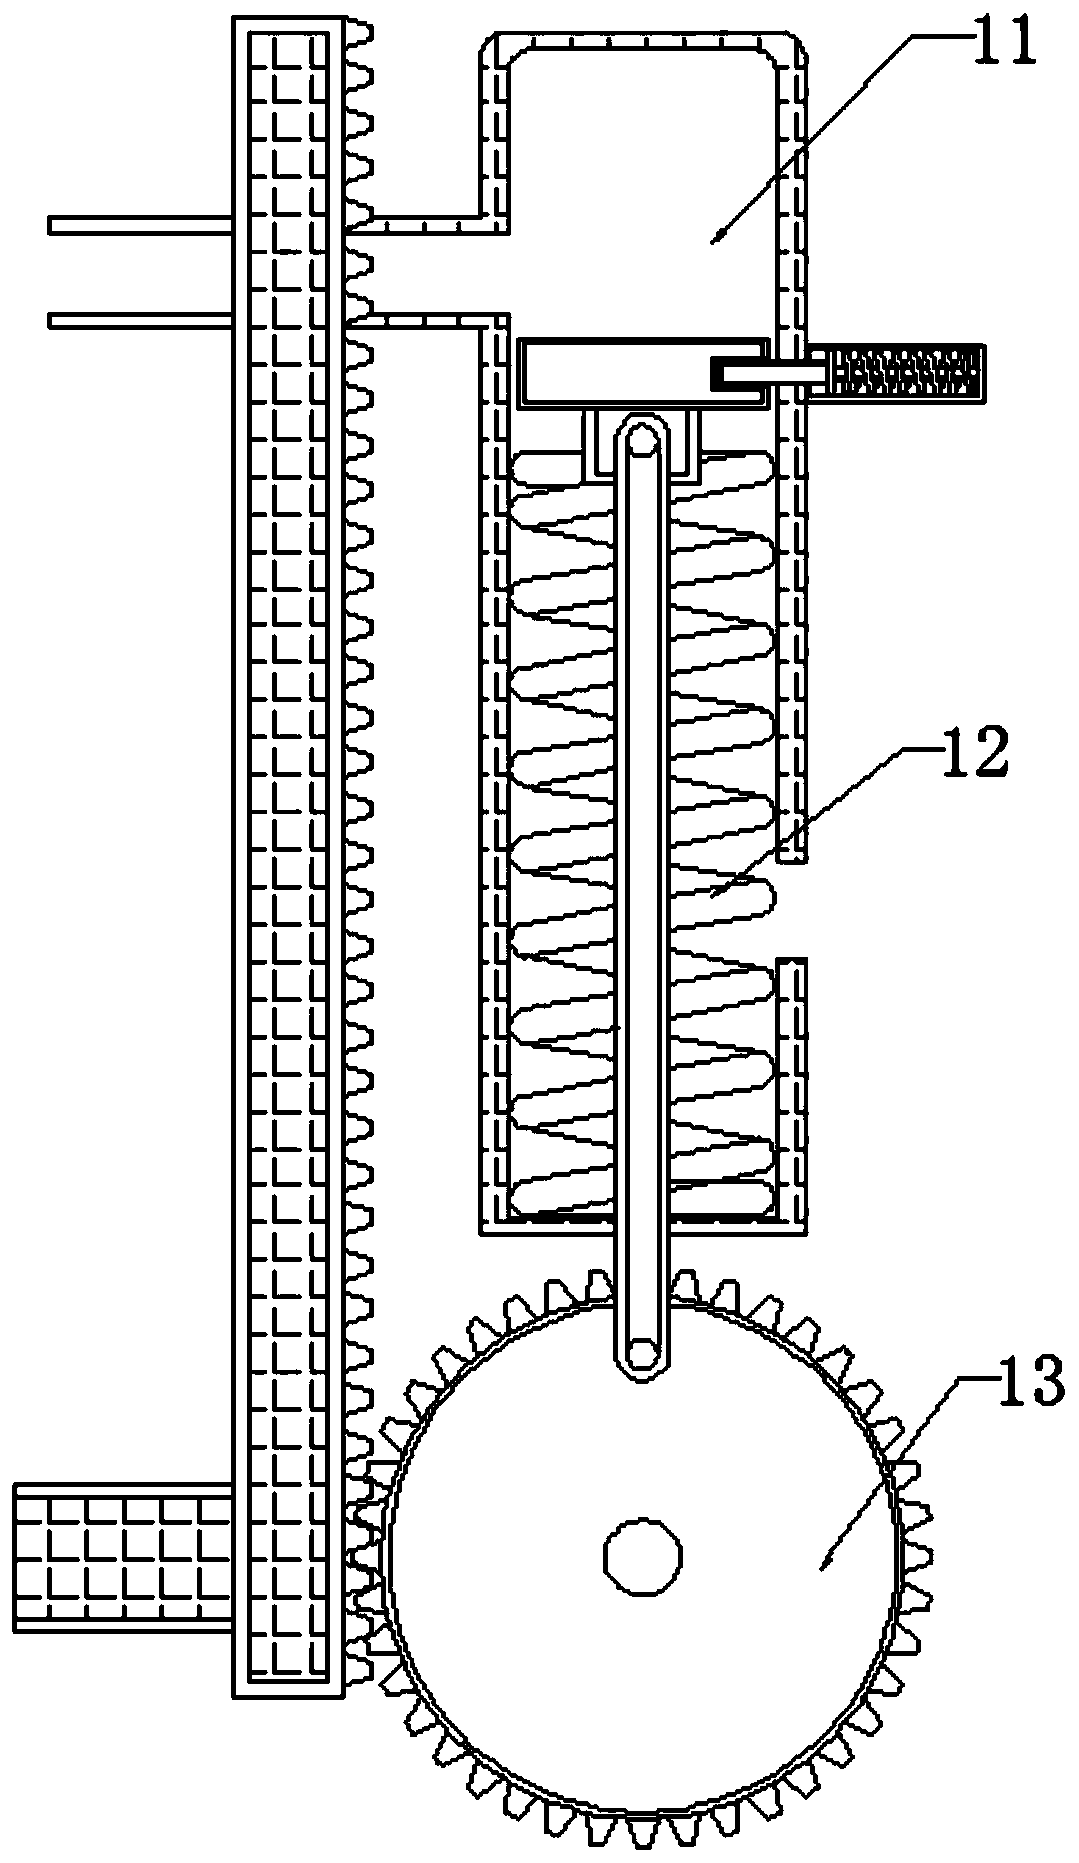 Device for increasing injection pressure through melting temperature pressurization